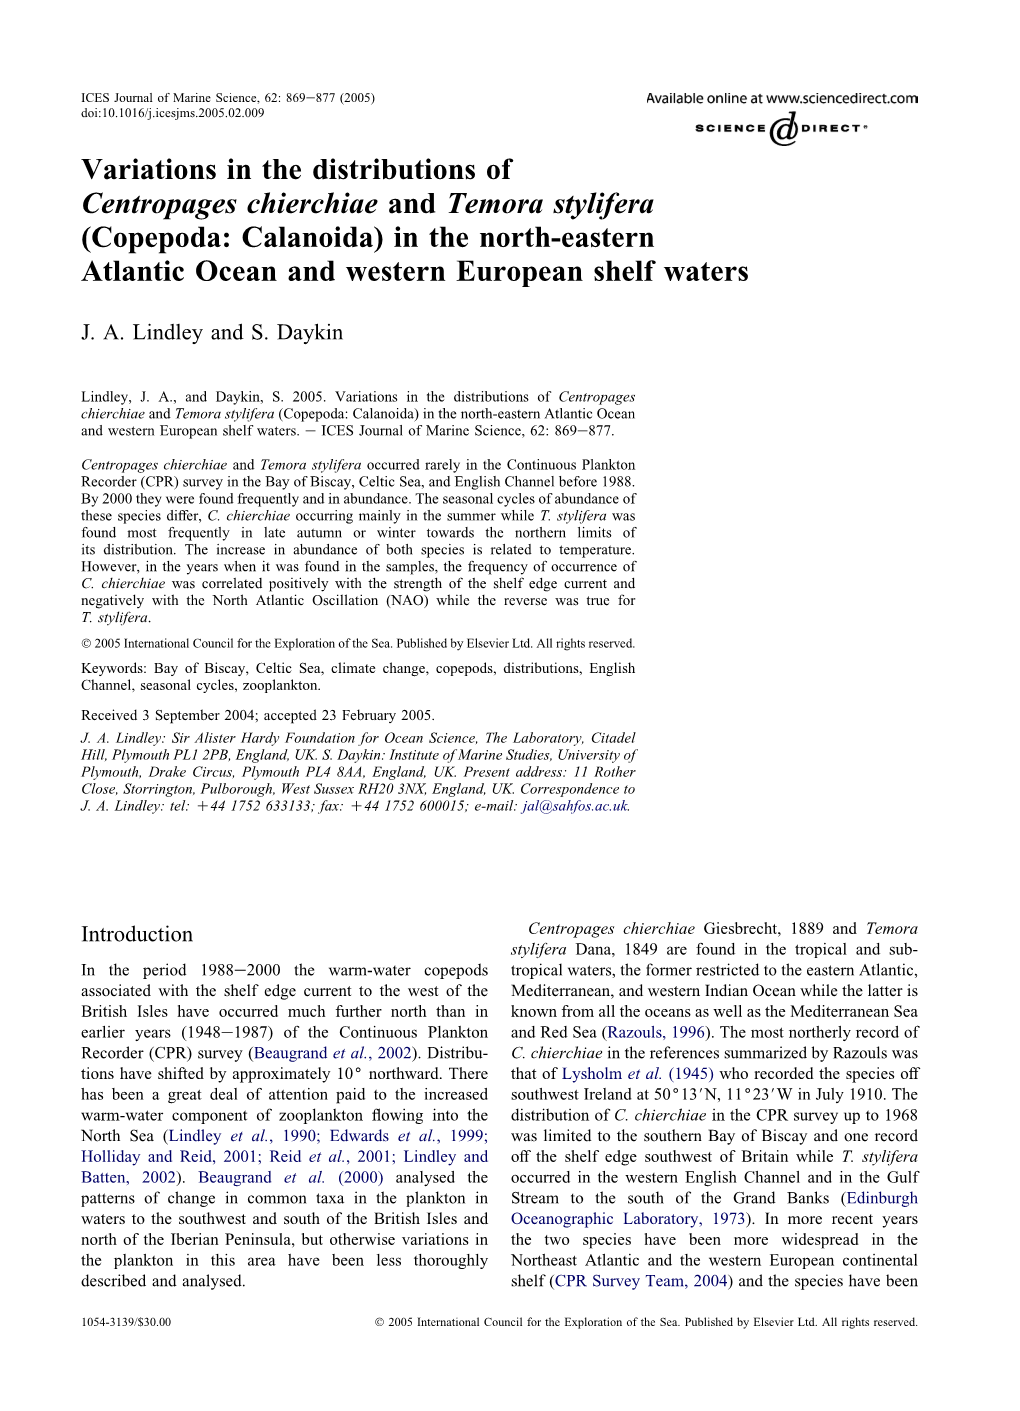 Variations in the Distributions of Centropages Chierchiae and Temora Stylifera (Copepoda: Calanoida) in the North-Eastern Atlant